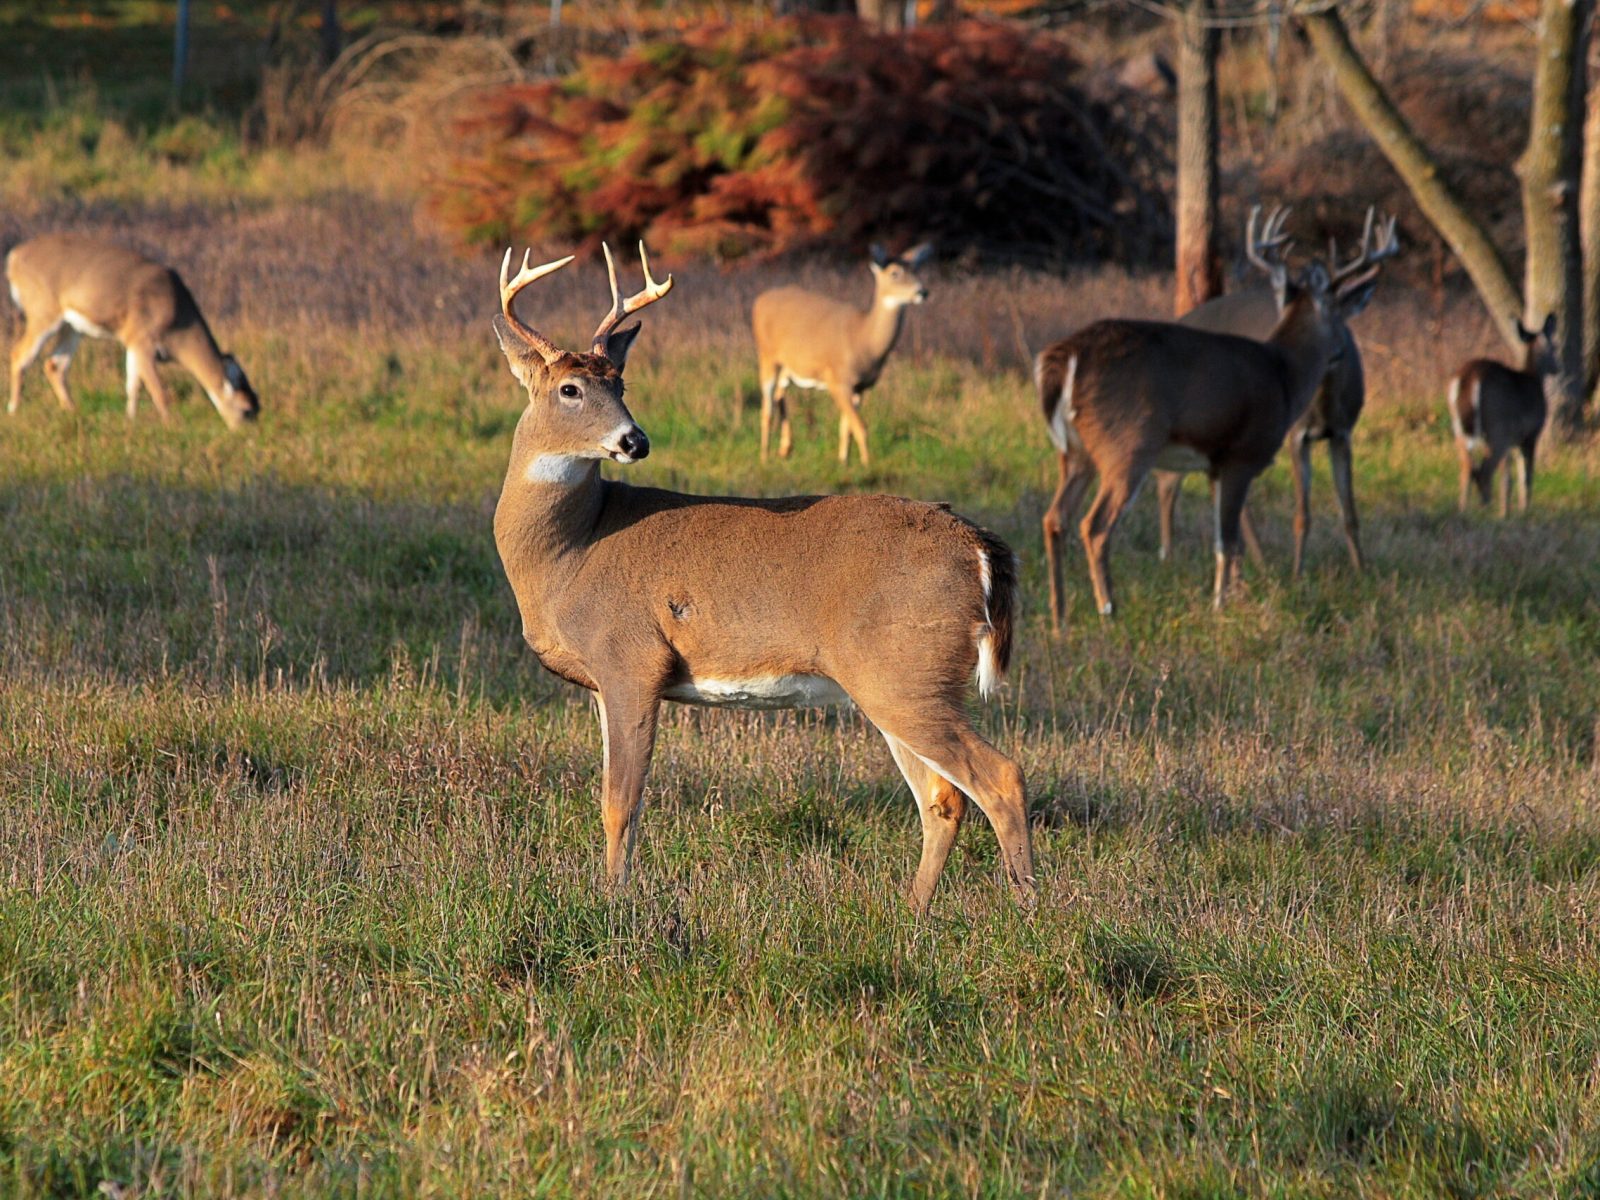 Graceful Northern Michigan Whitetails showcasing their natural beauty in a serene woodland setting.